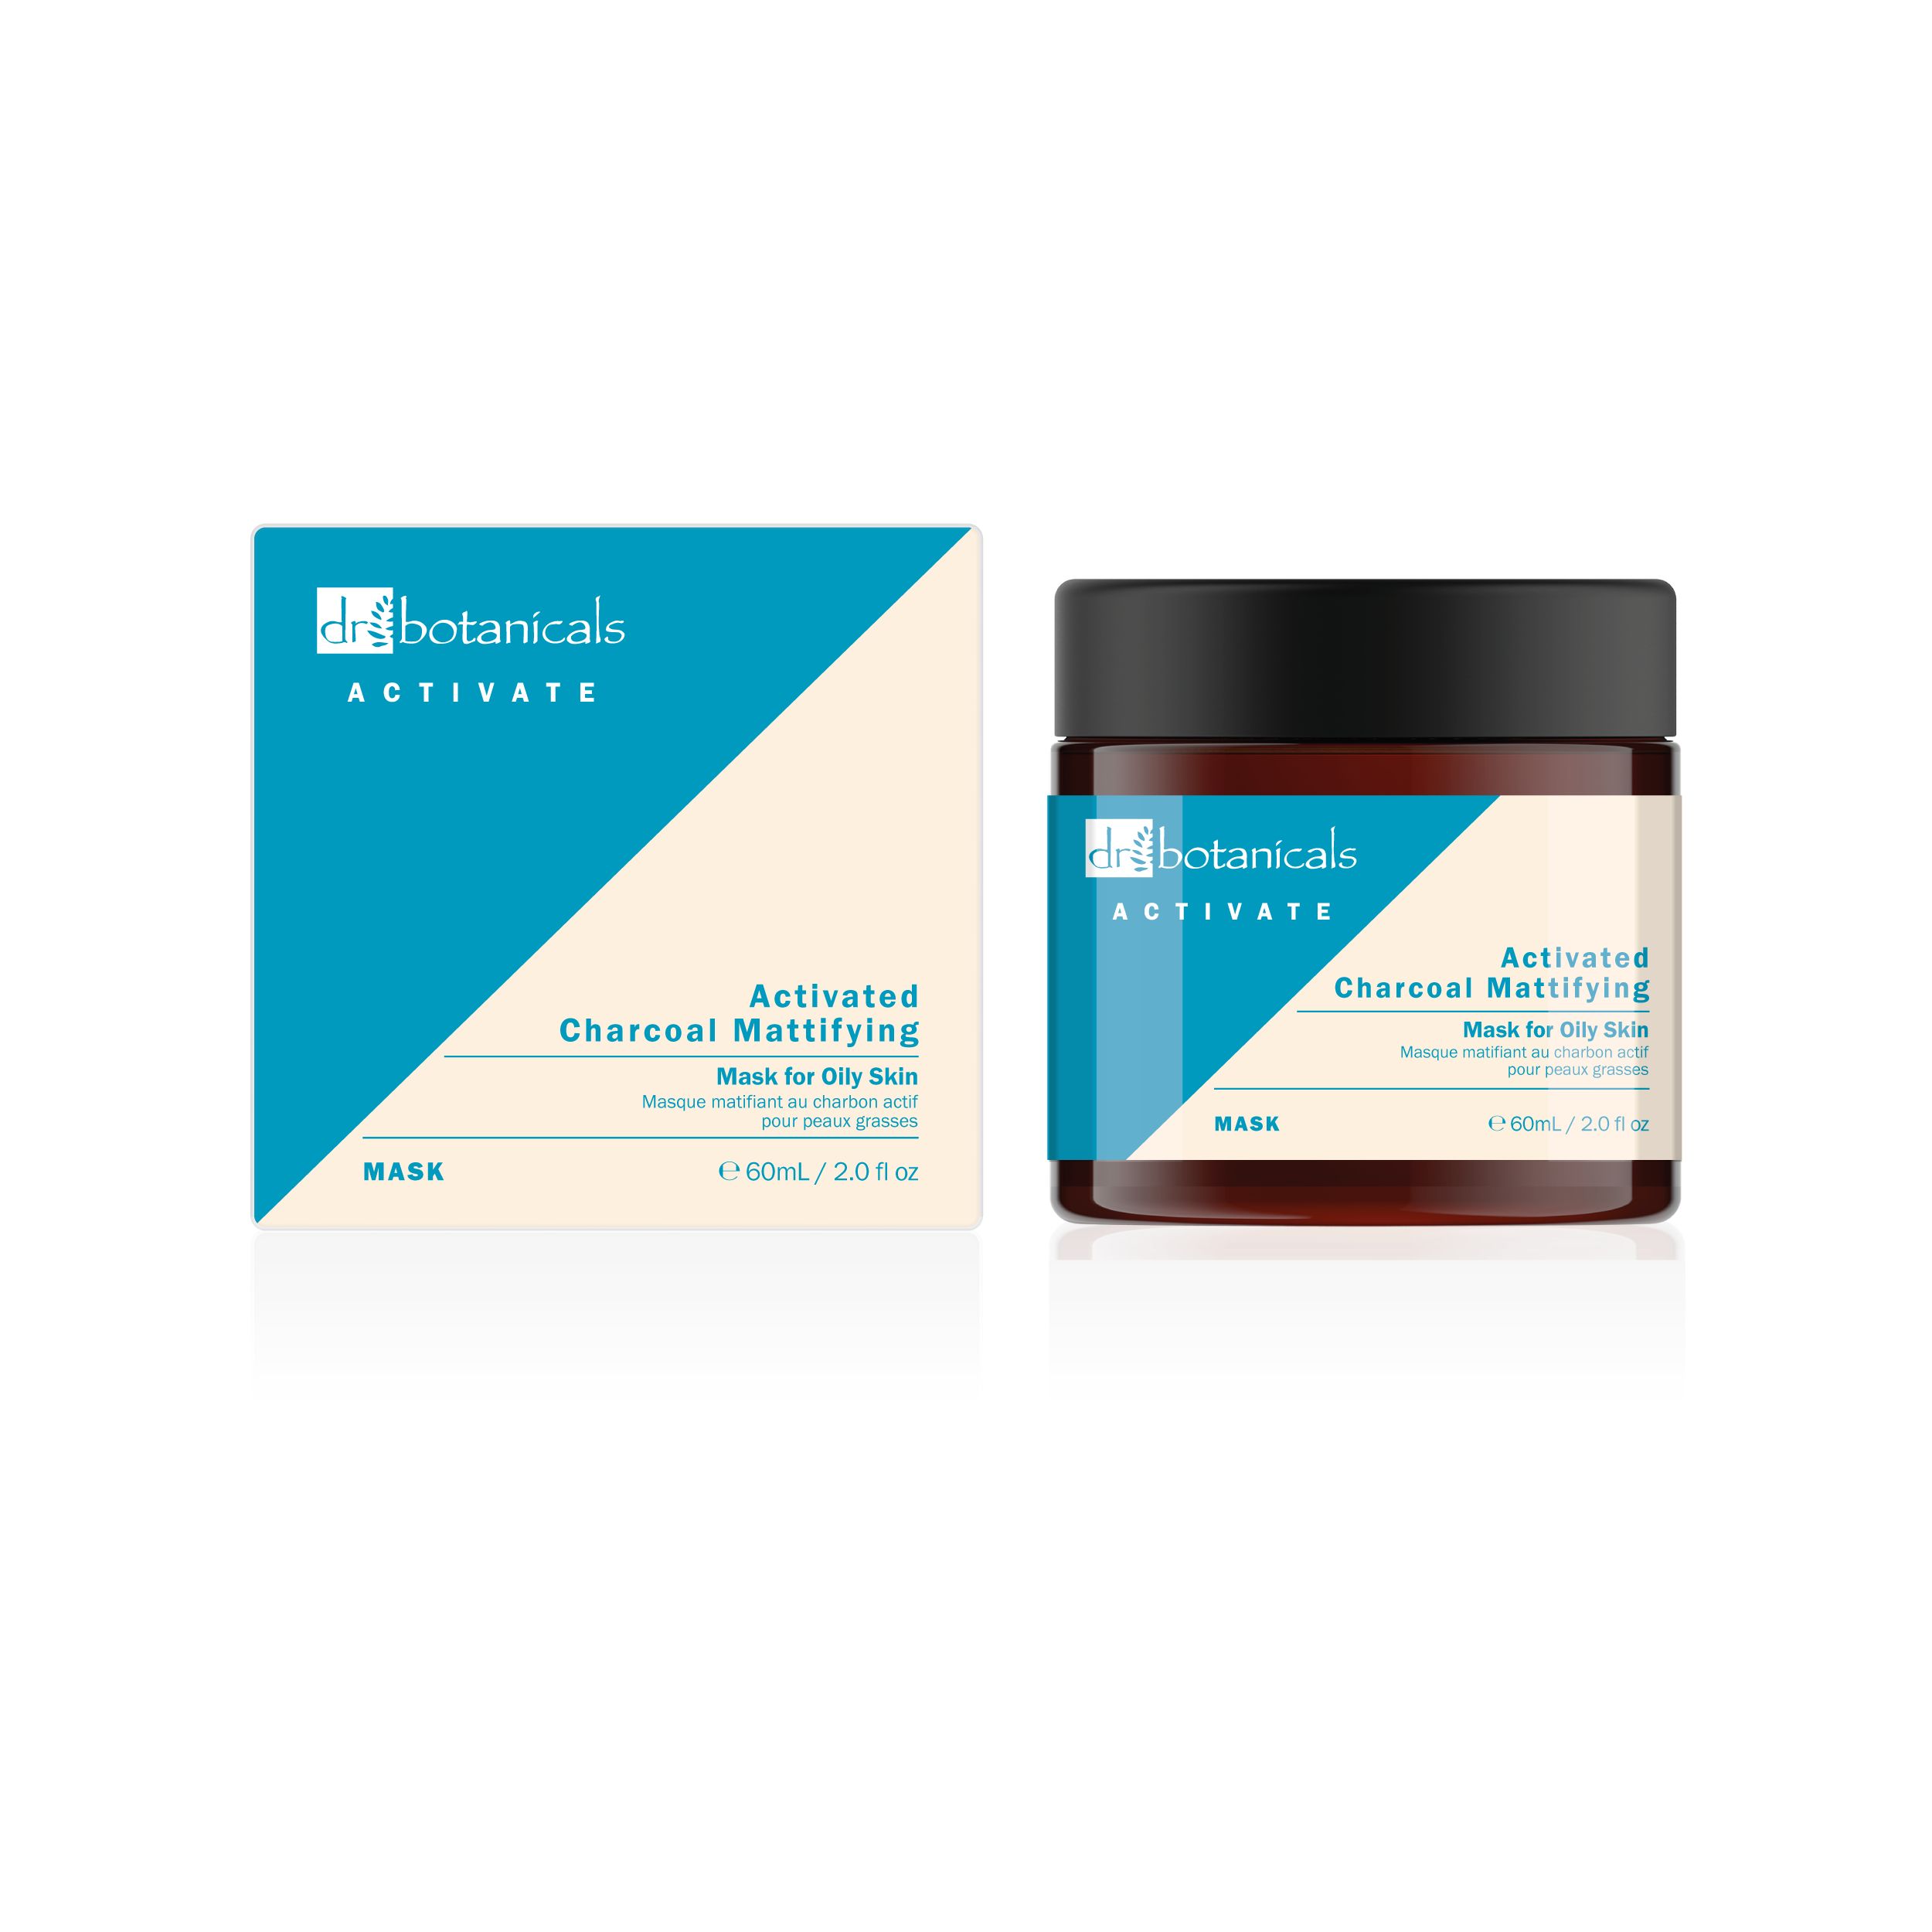 Dr Botanicals Activated Charcoal Mattifying Mask for Oily Skin